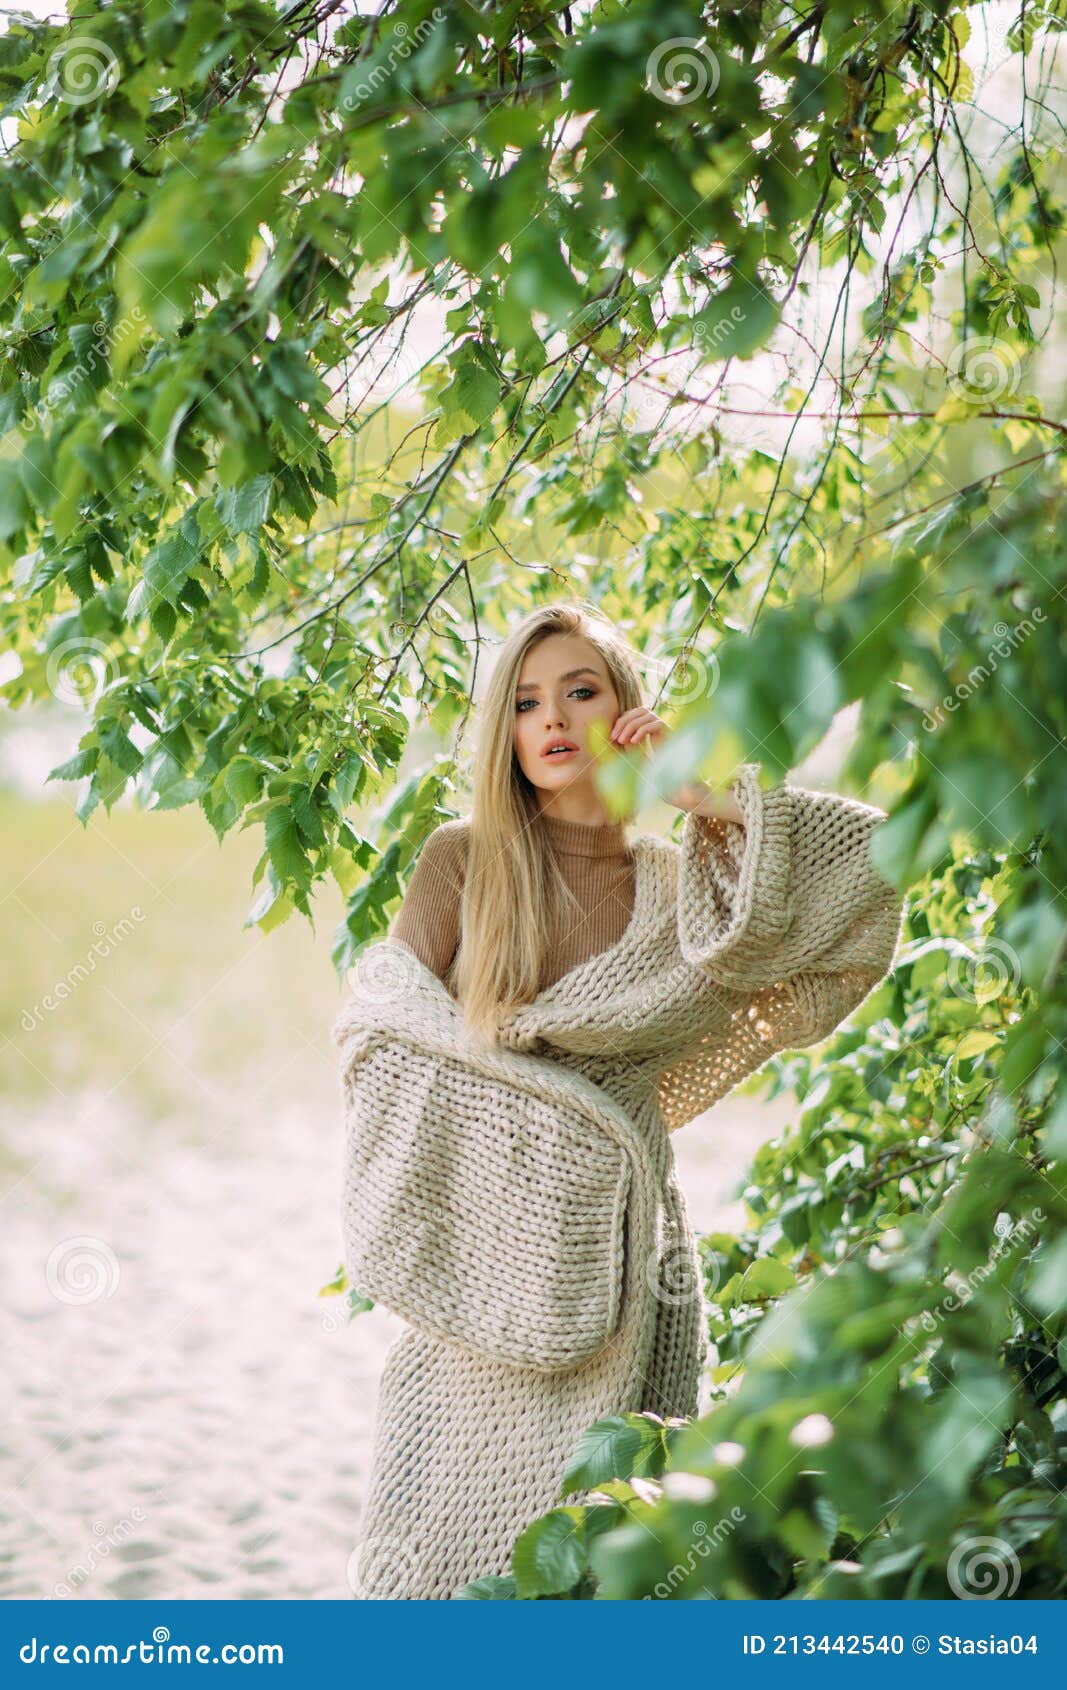 Blonde Woman Poses among Green Branches of Tree Near Lake Stock Photo ...